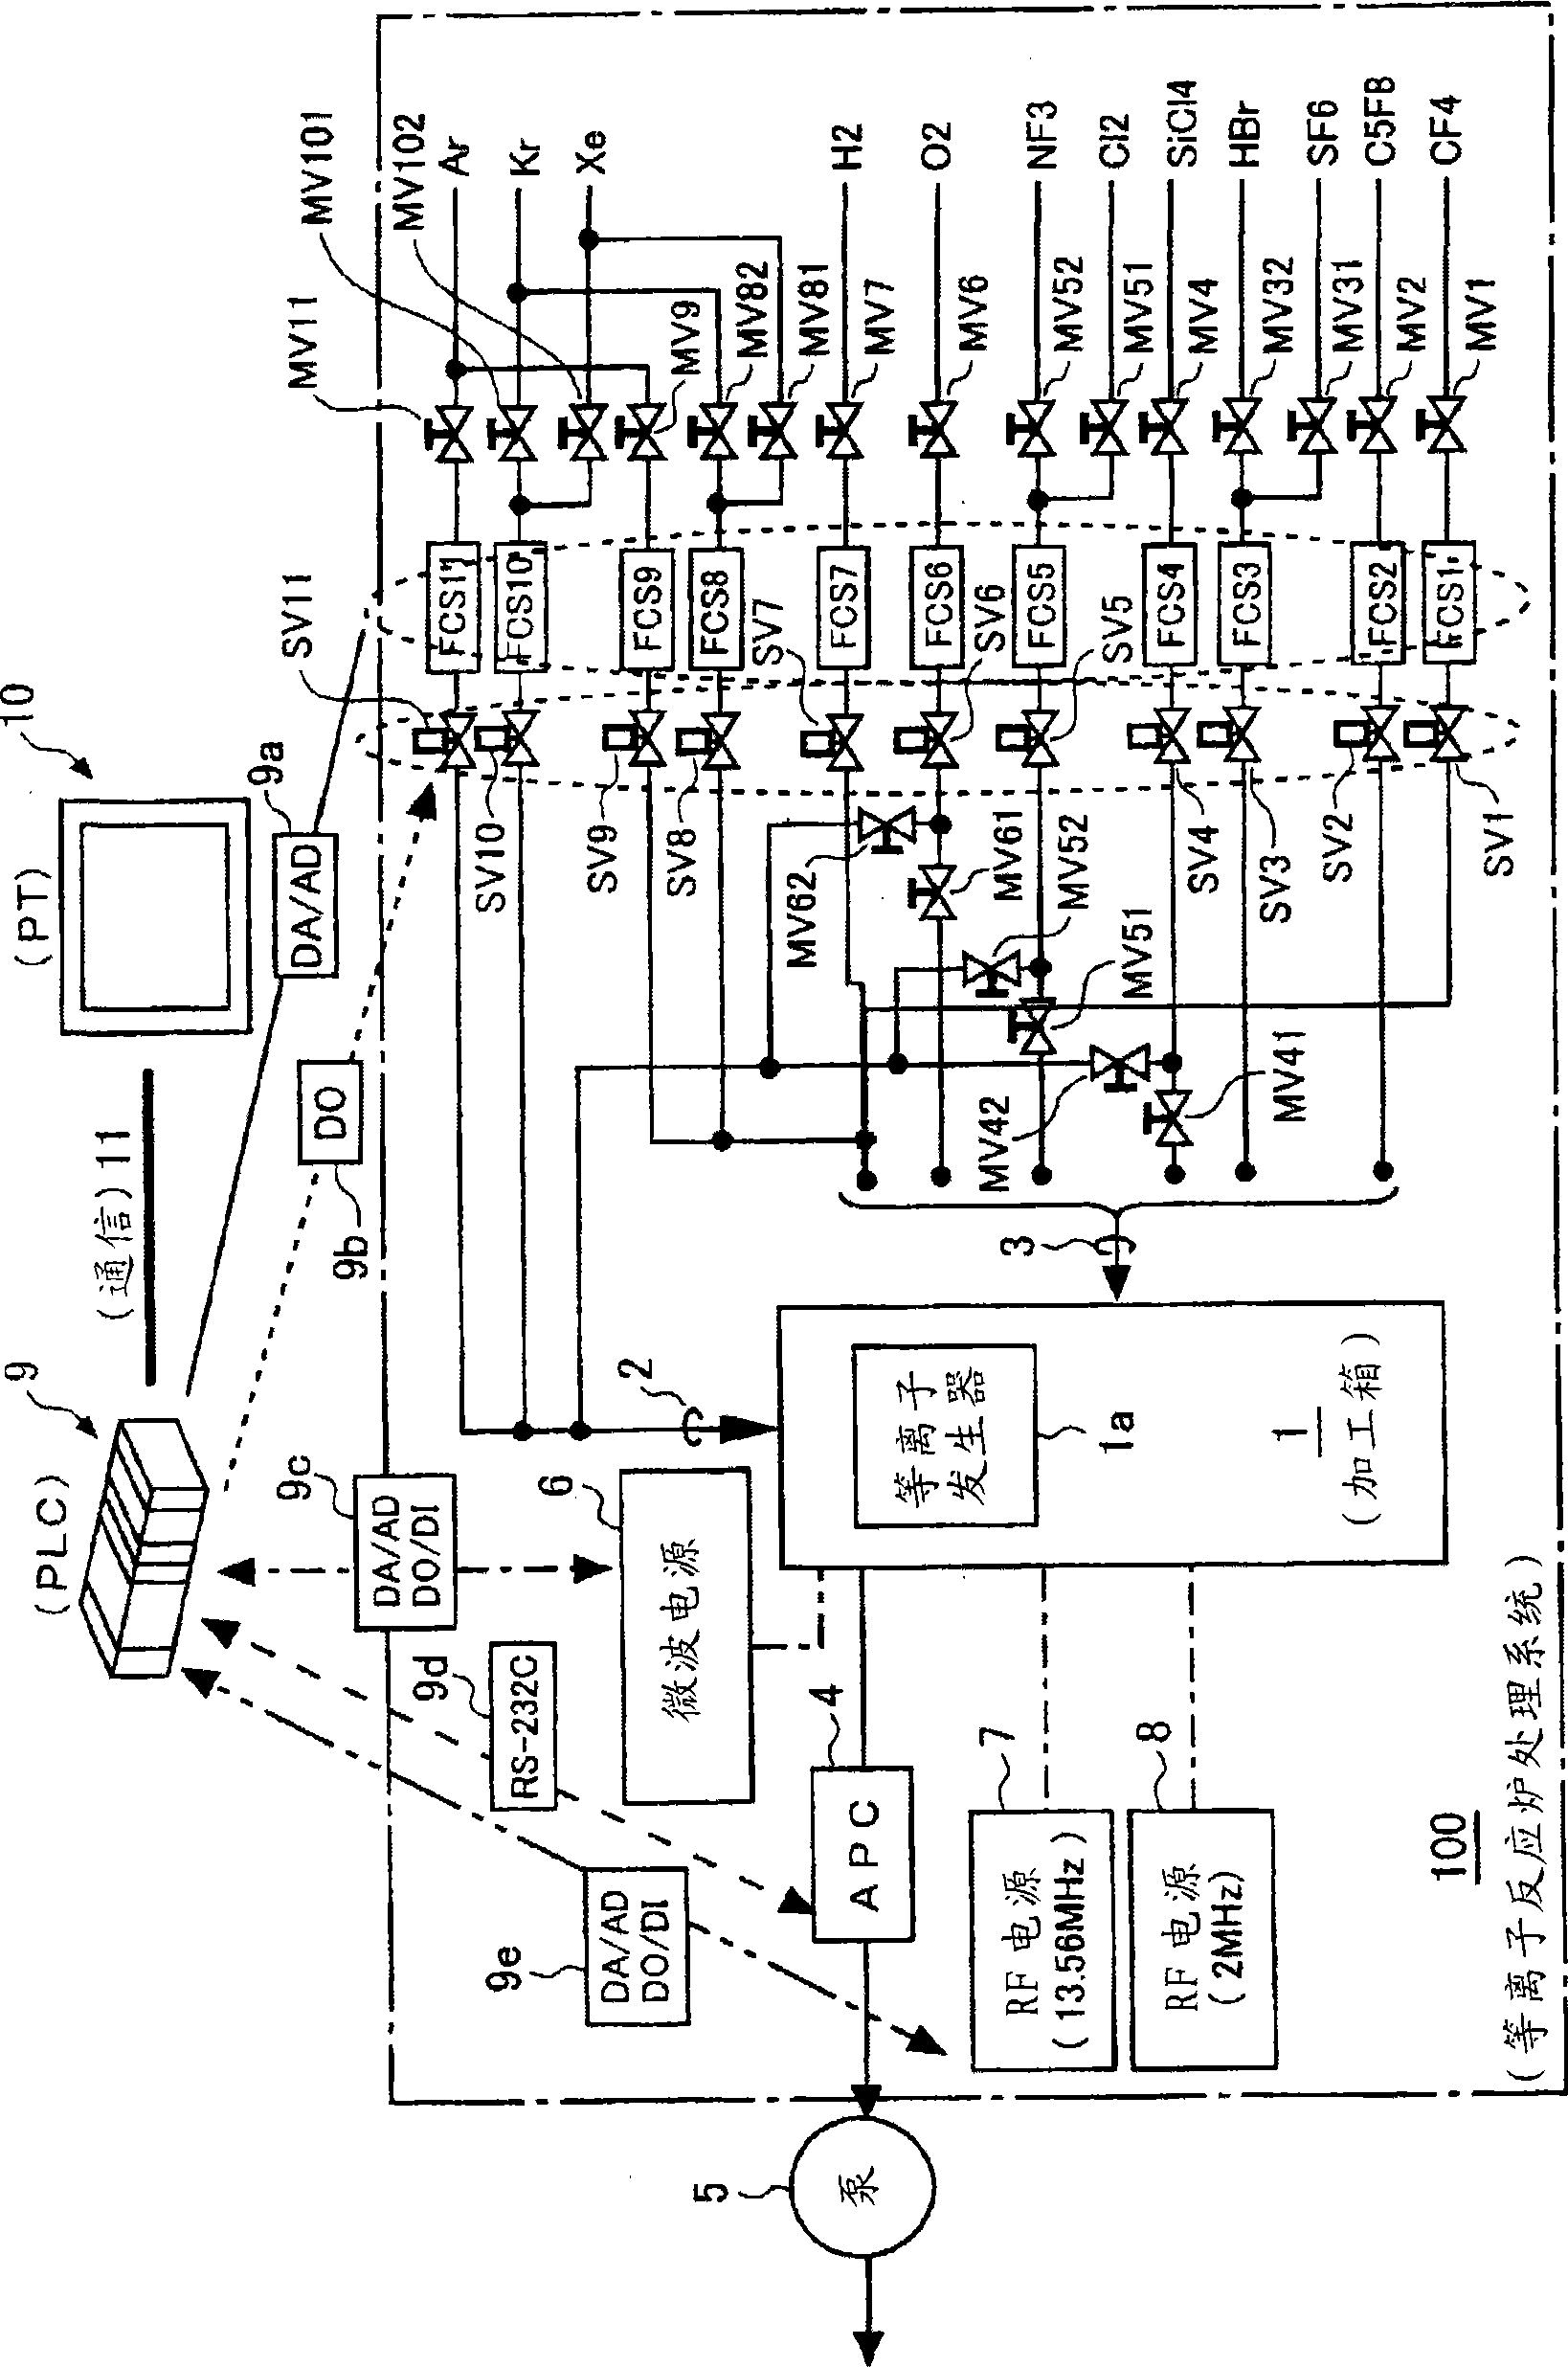 Method for manufacturing electronic device using plasma reactor processing system